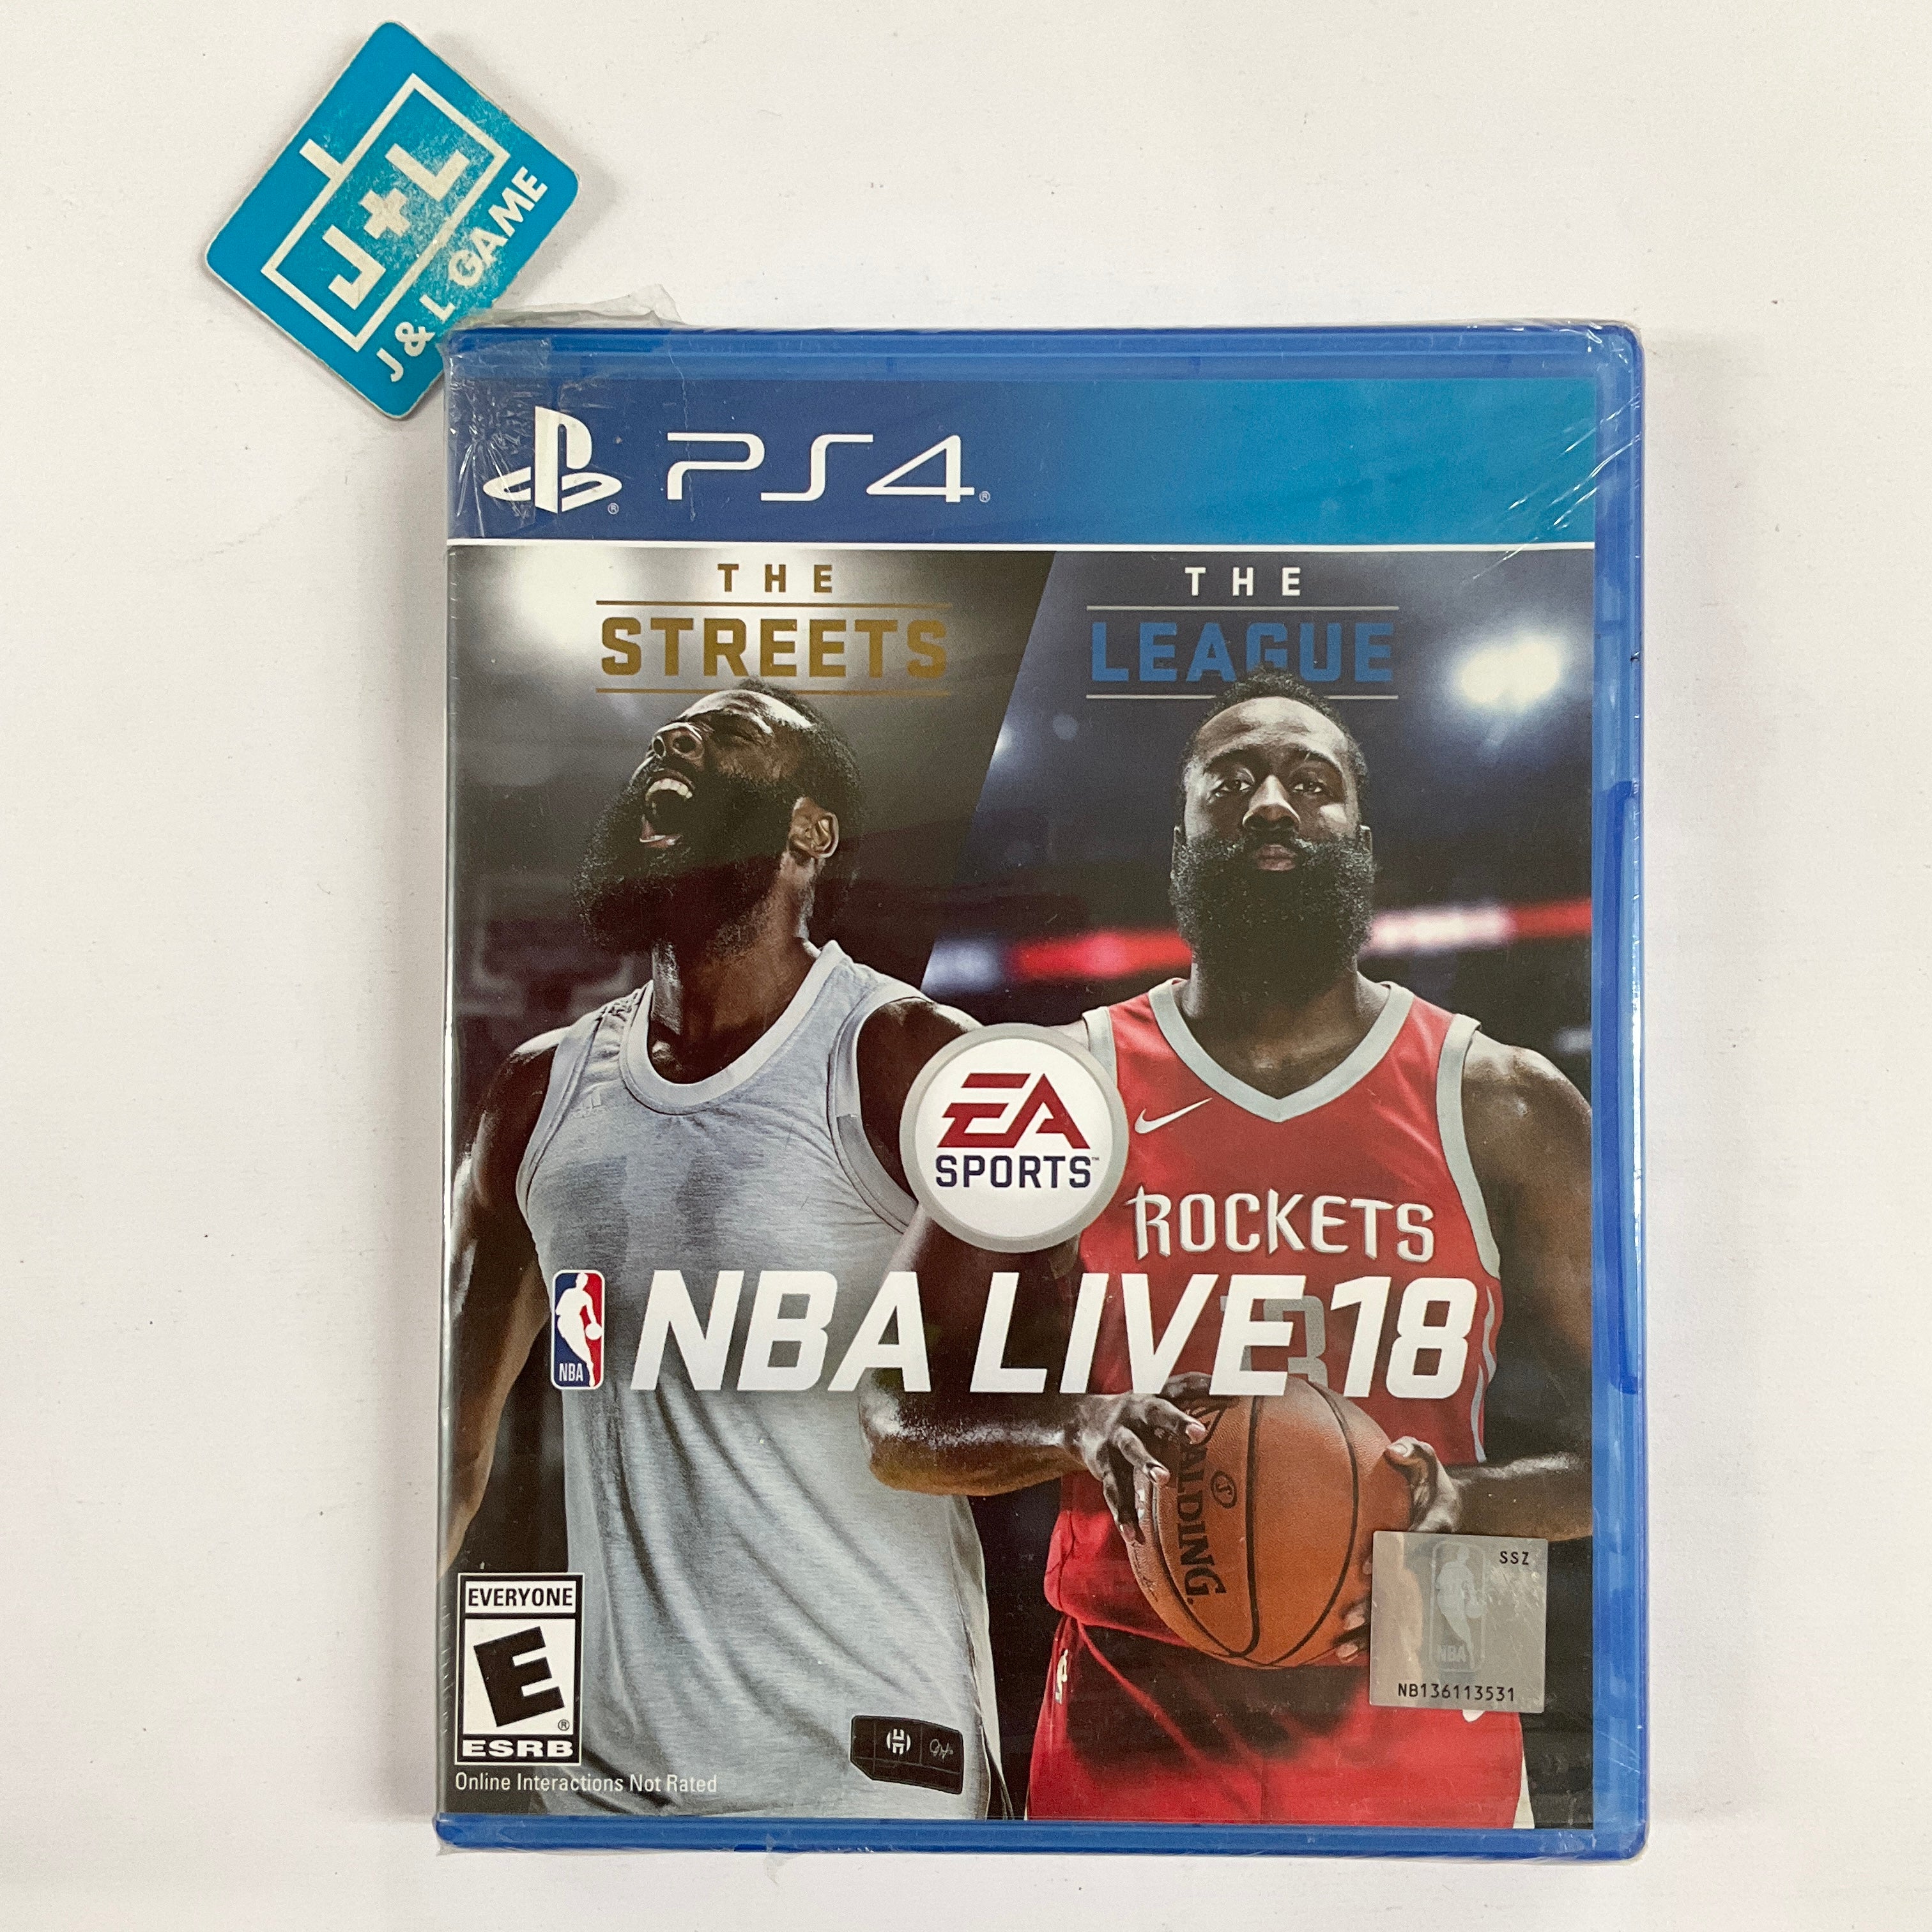 NBA LIVE 18 - (PS4) PlayStation 4 Video Games Electronic Arts   